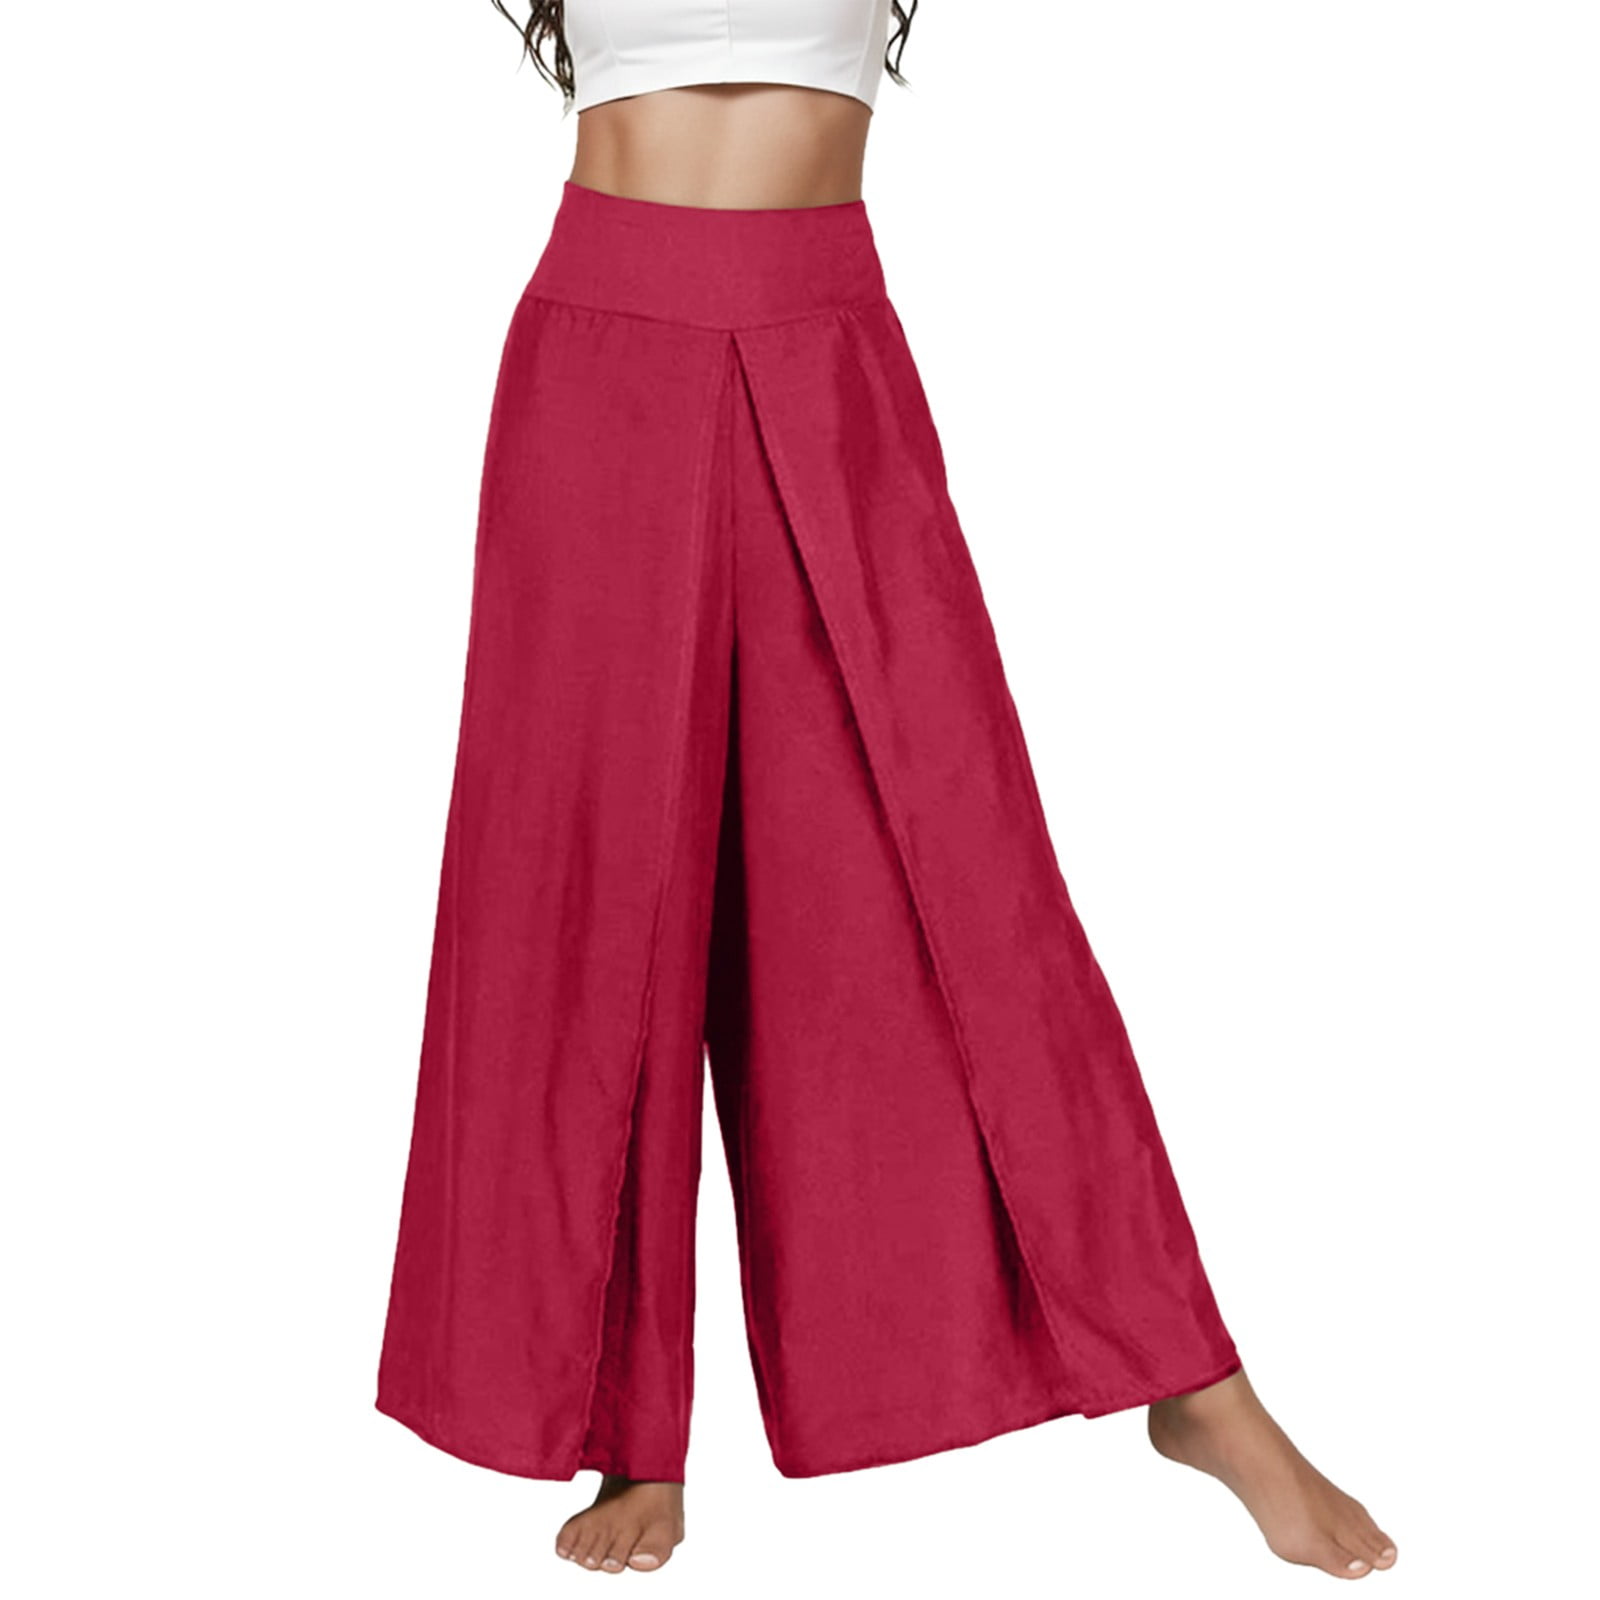 Quealent Work Pants for Women Plus Size Womens Smocked Ruffle High Waisted  Wide Leg Pants Casual Loose Yoga Lounge Pajamas with Pockets (Red,XL) 